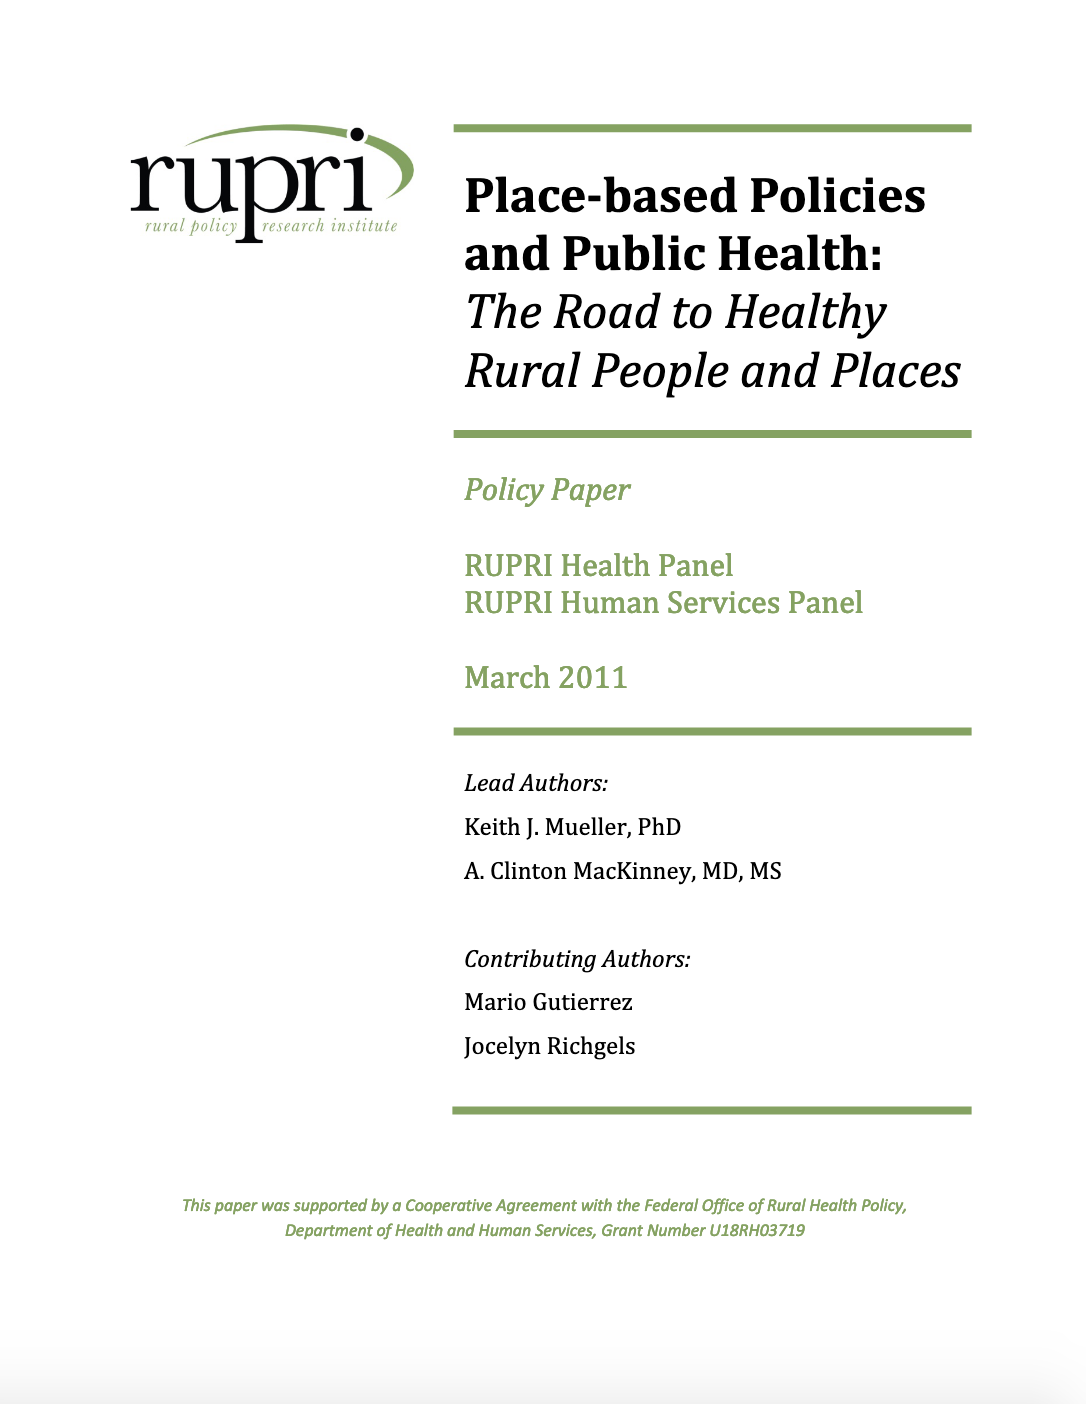 Place-based Policies and Public Health: The Road to Healthy Rural People and Places (Cover Image)